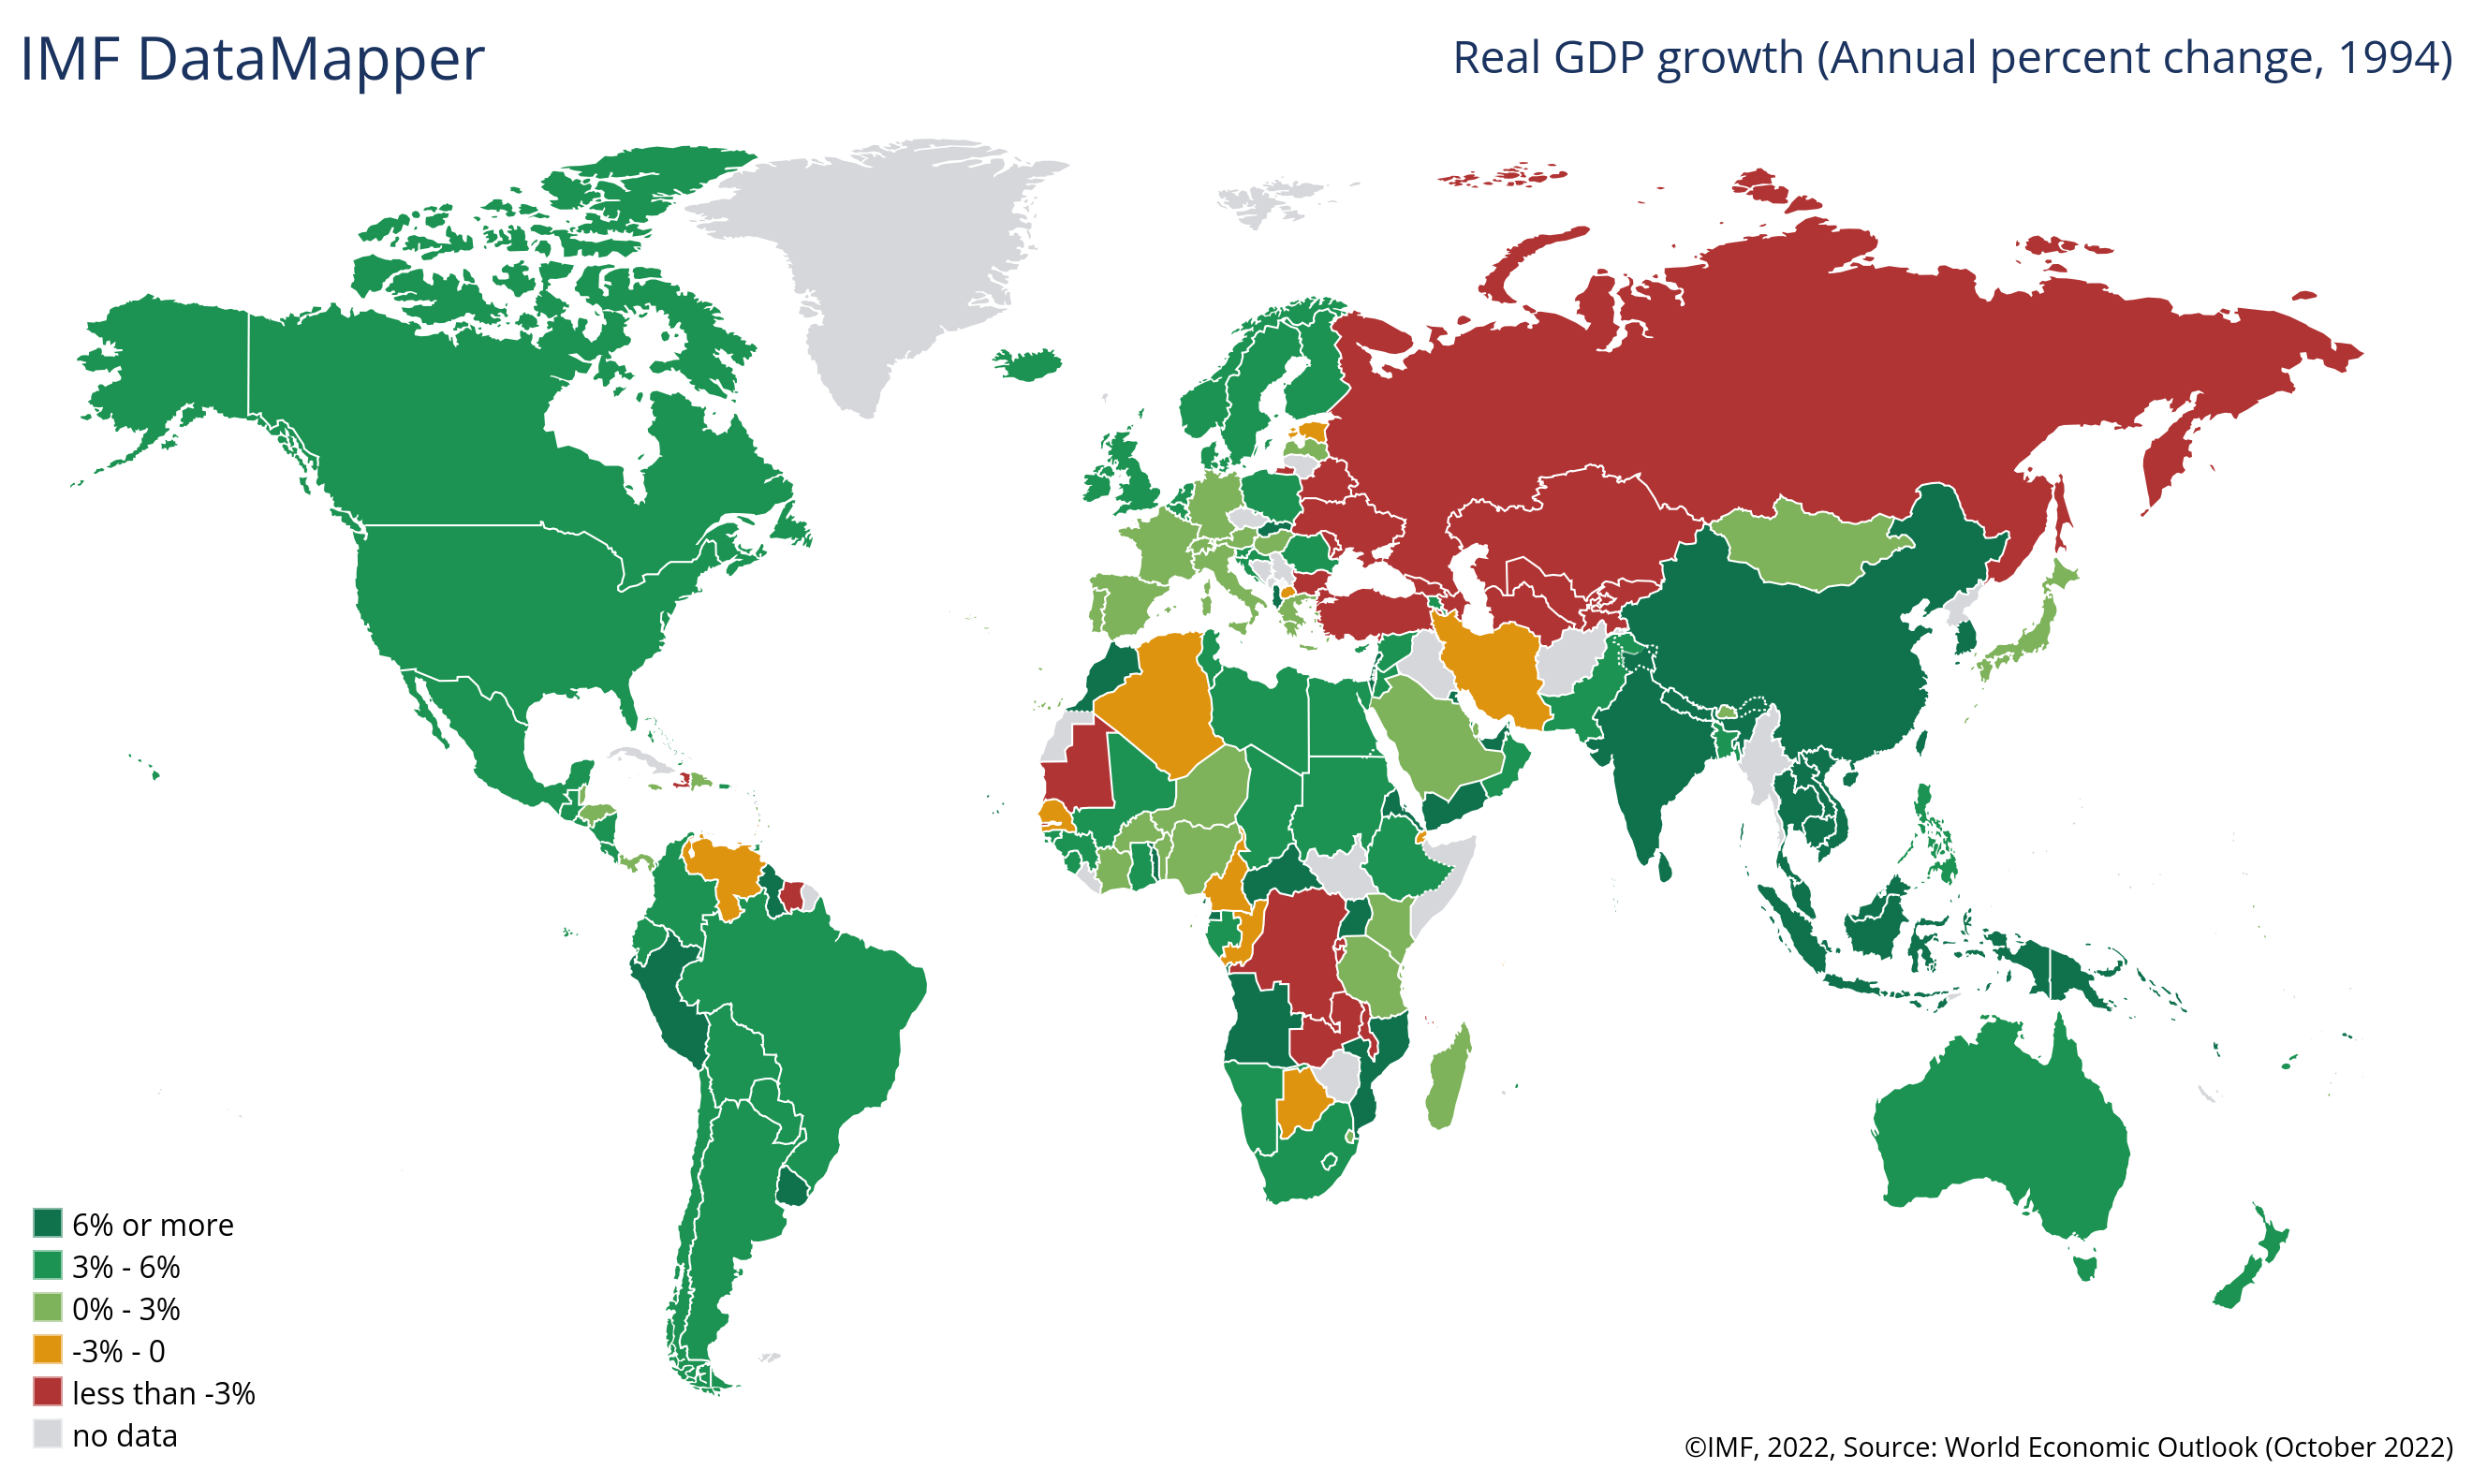 How inflated prominent countries are